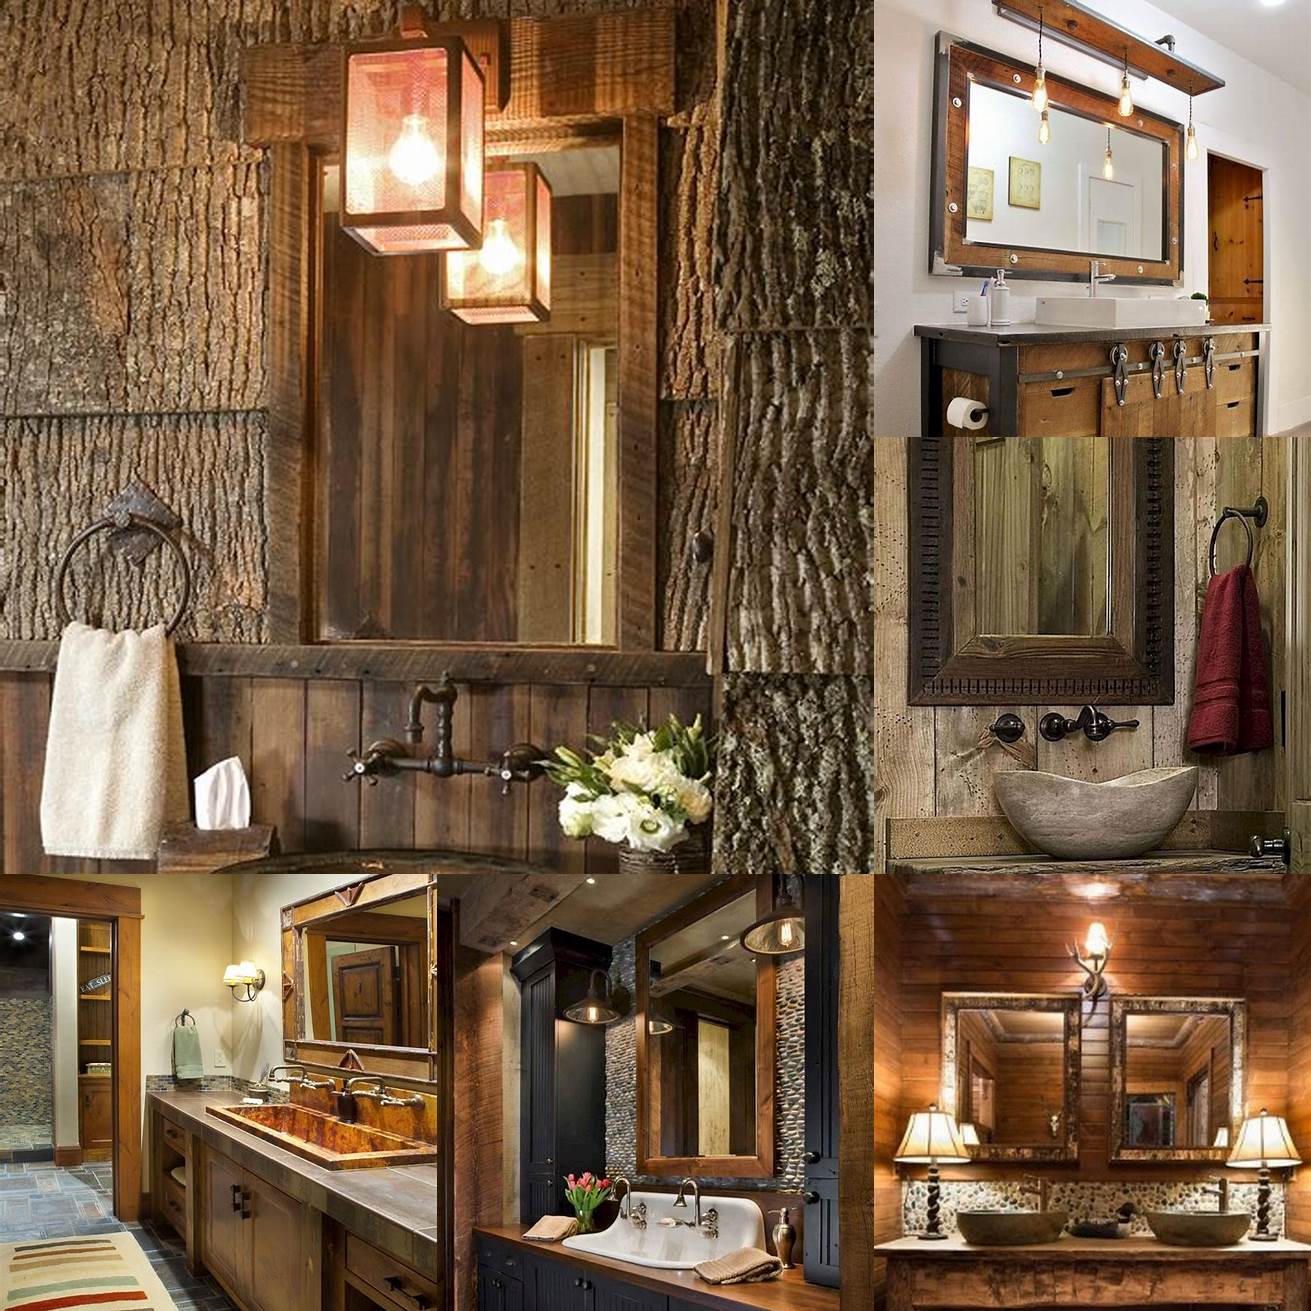 A rustic bathroom vanity with a modern twist can add a unique and stylish touch to your bathroom